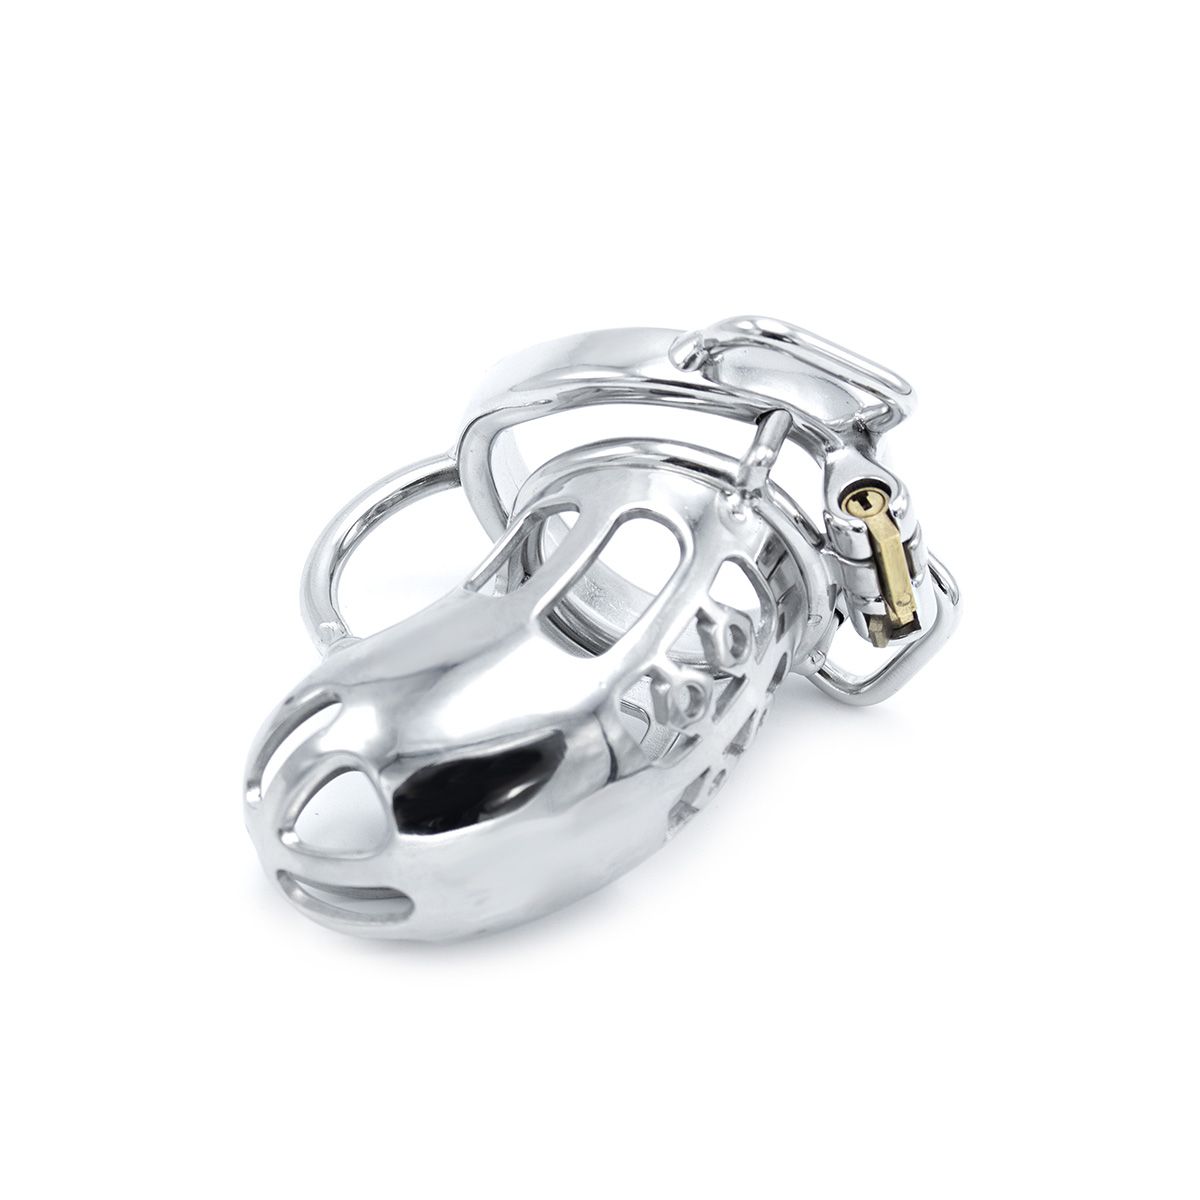 The Belted Chastity Device with Ball Divider